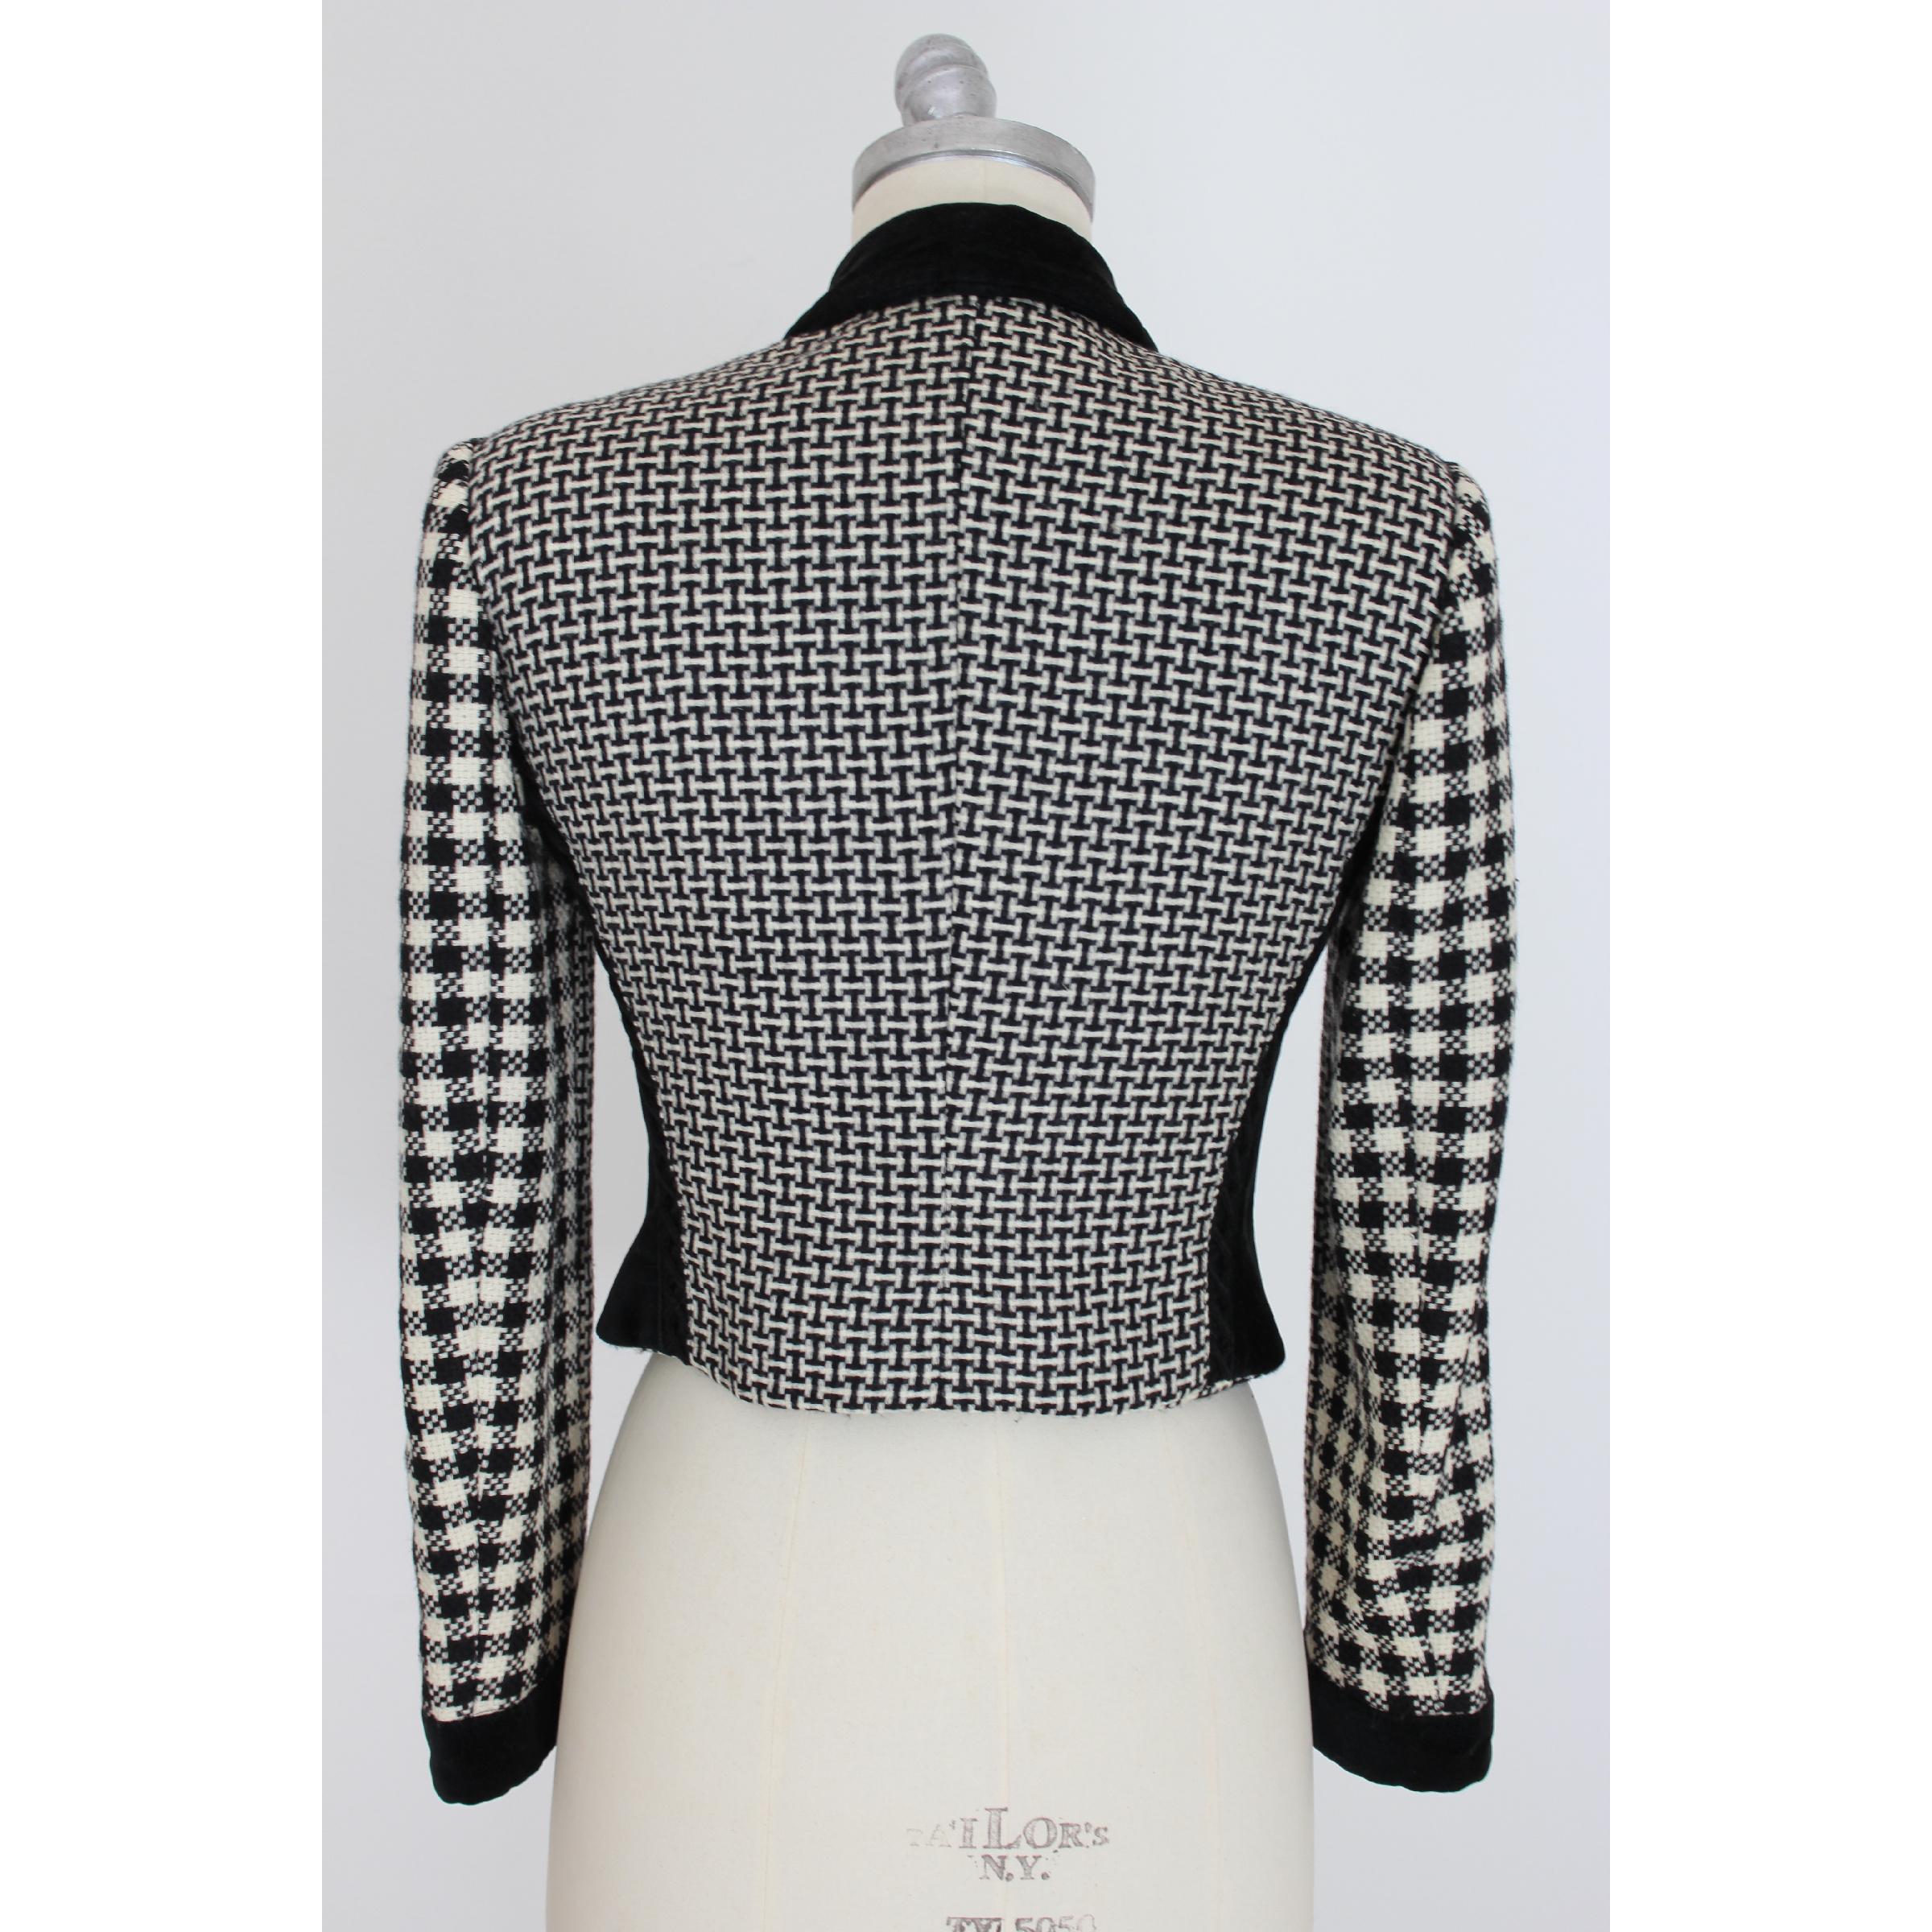 Gianni Versace Jacket Pied De Poule Wool Check Vintage Black White, 1980s In Excellent Condition In Brindisi, Bt